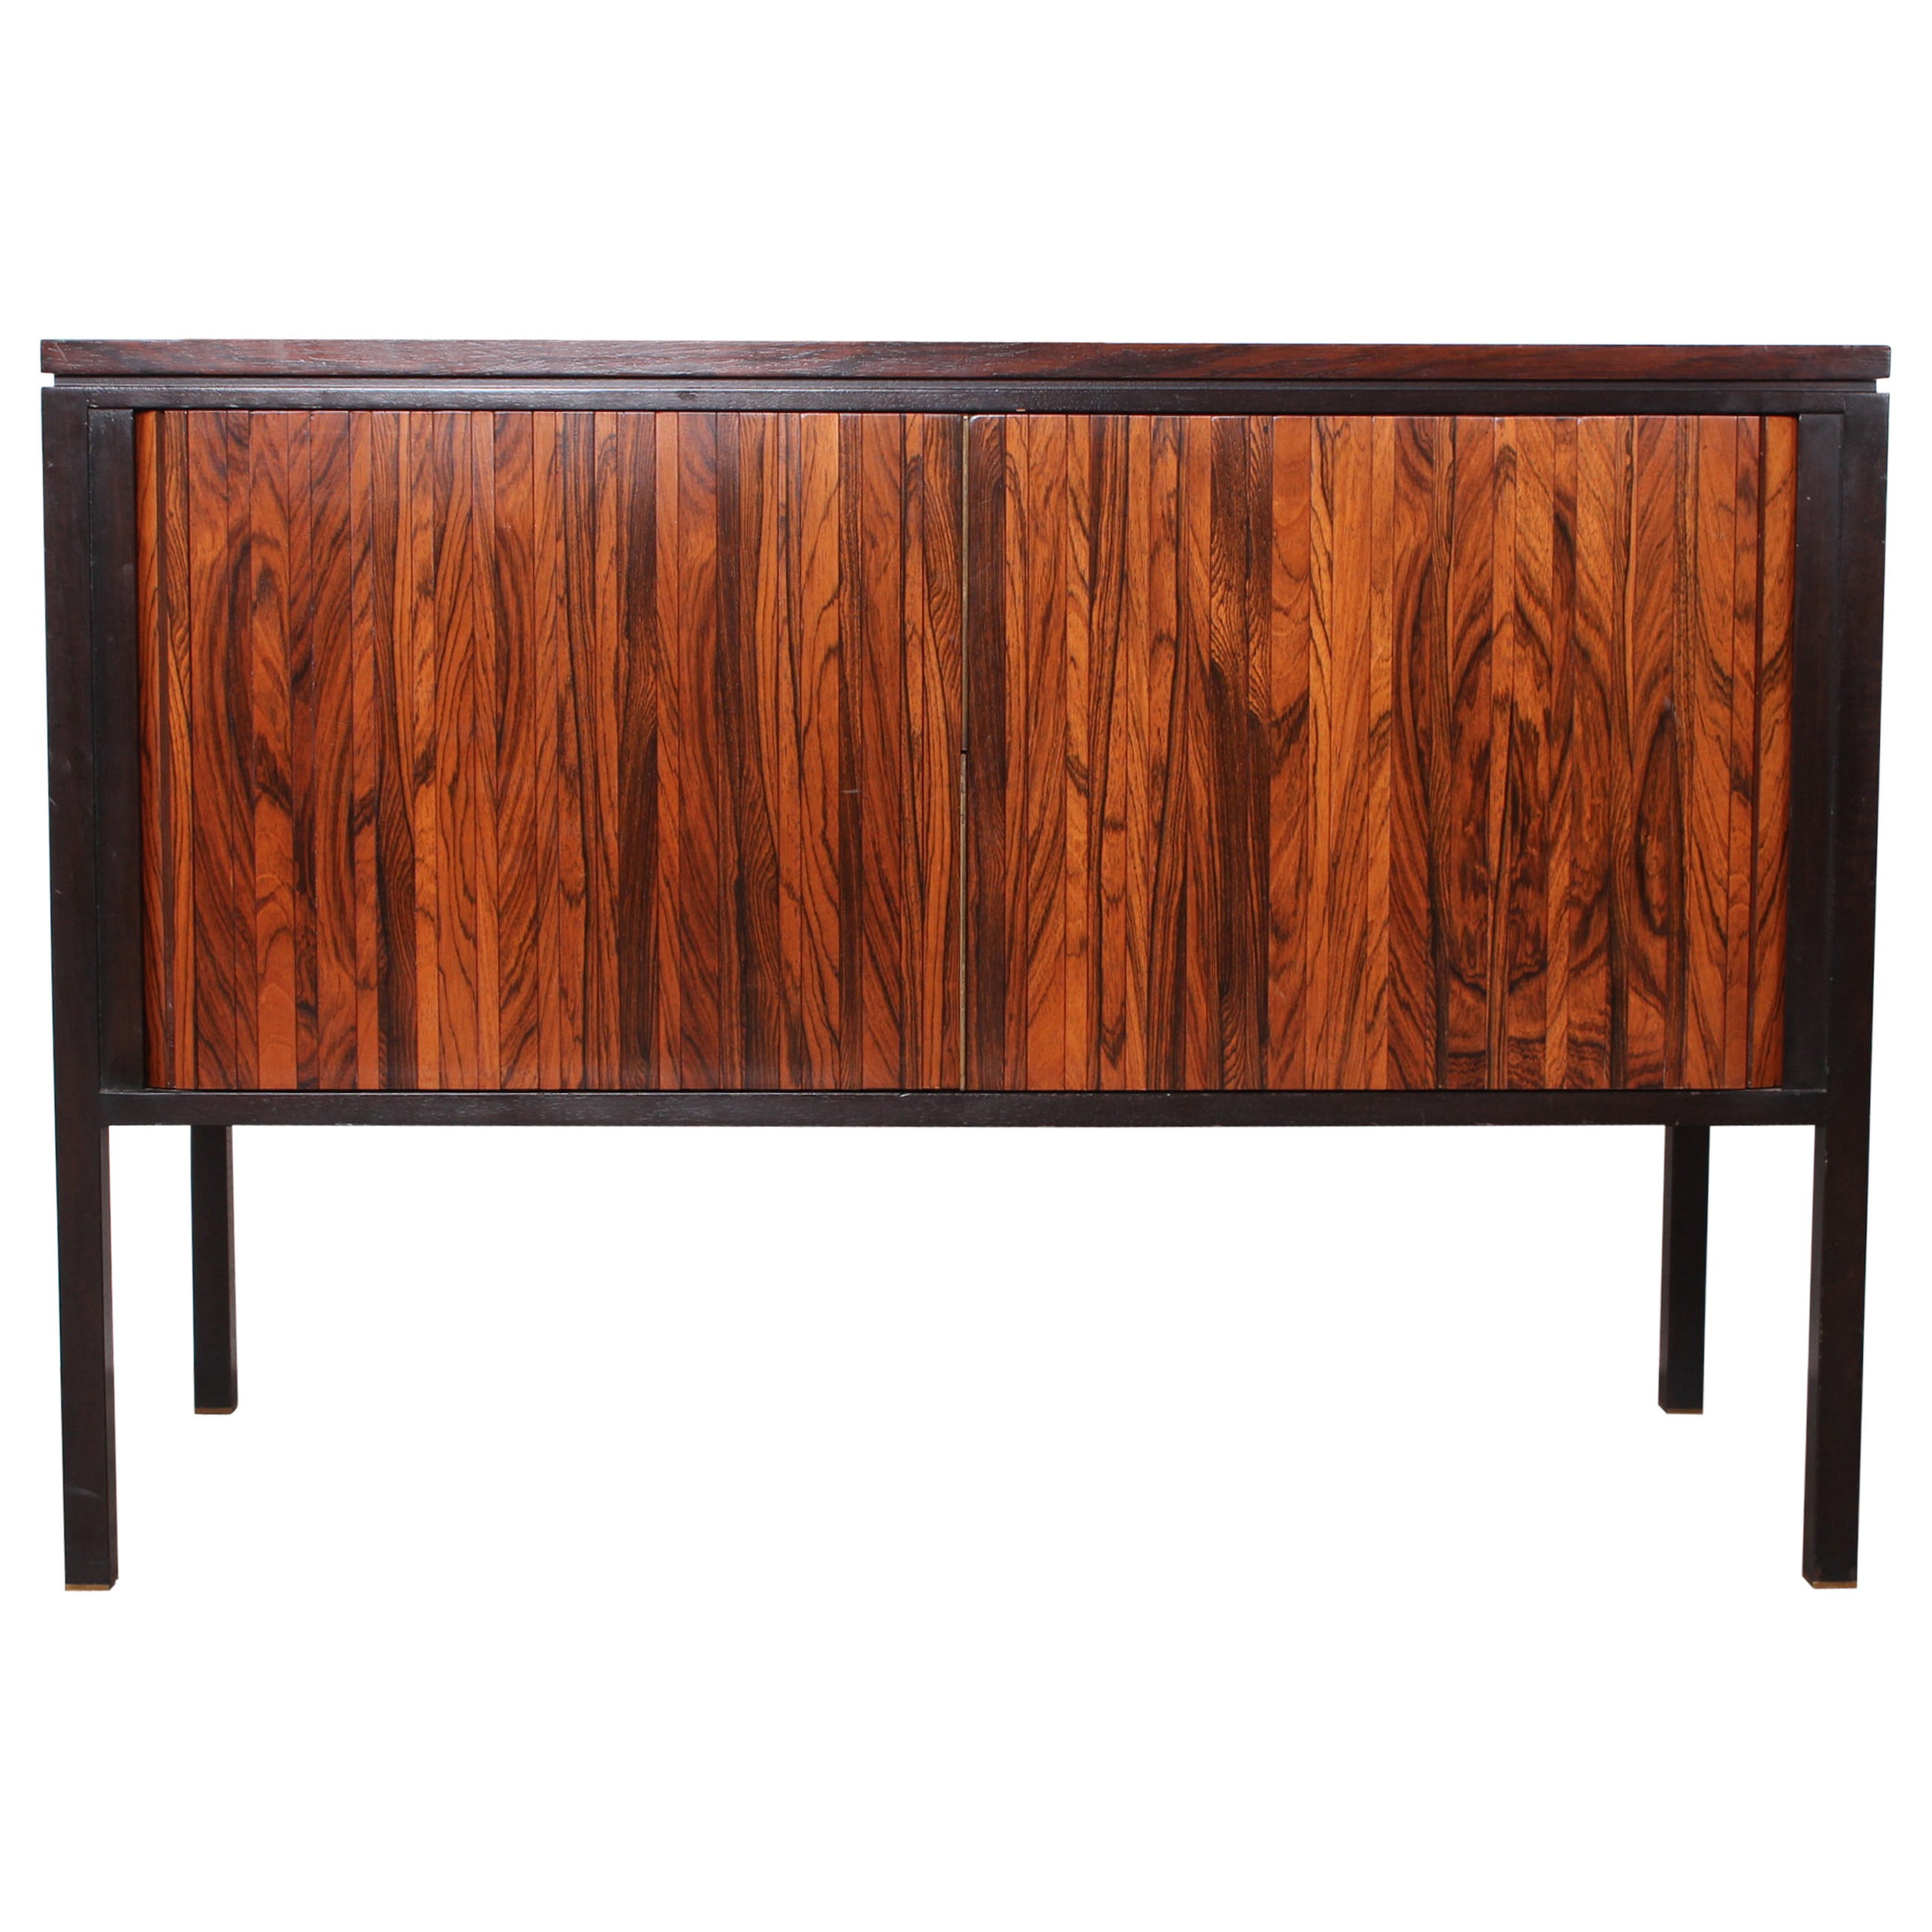 Rosewood Tambour Cabinet by Edward Wormley for Dunbar